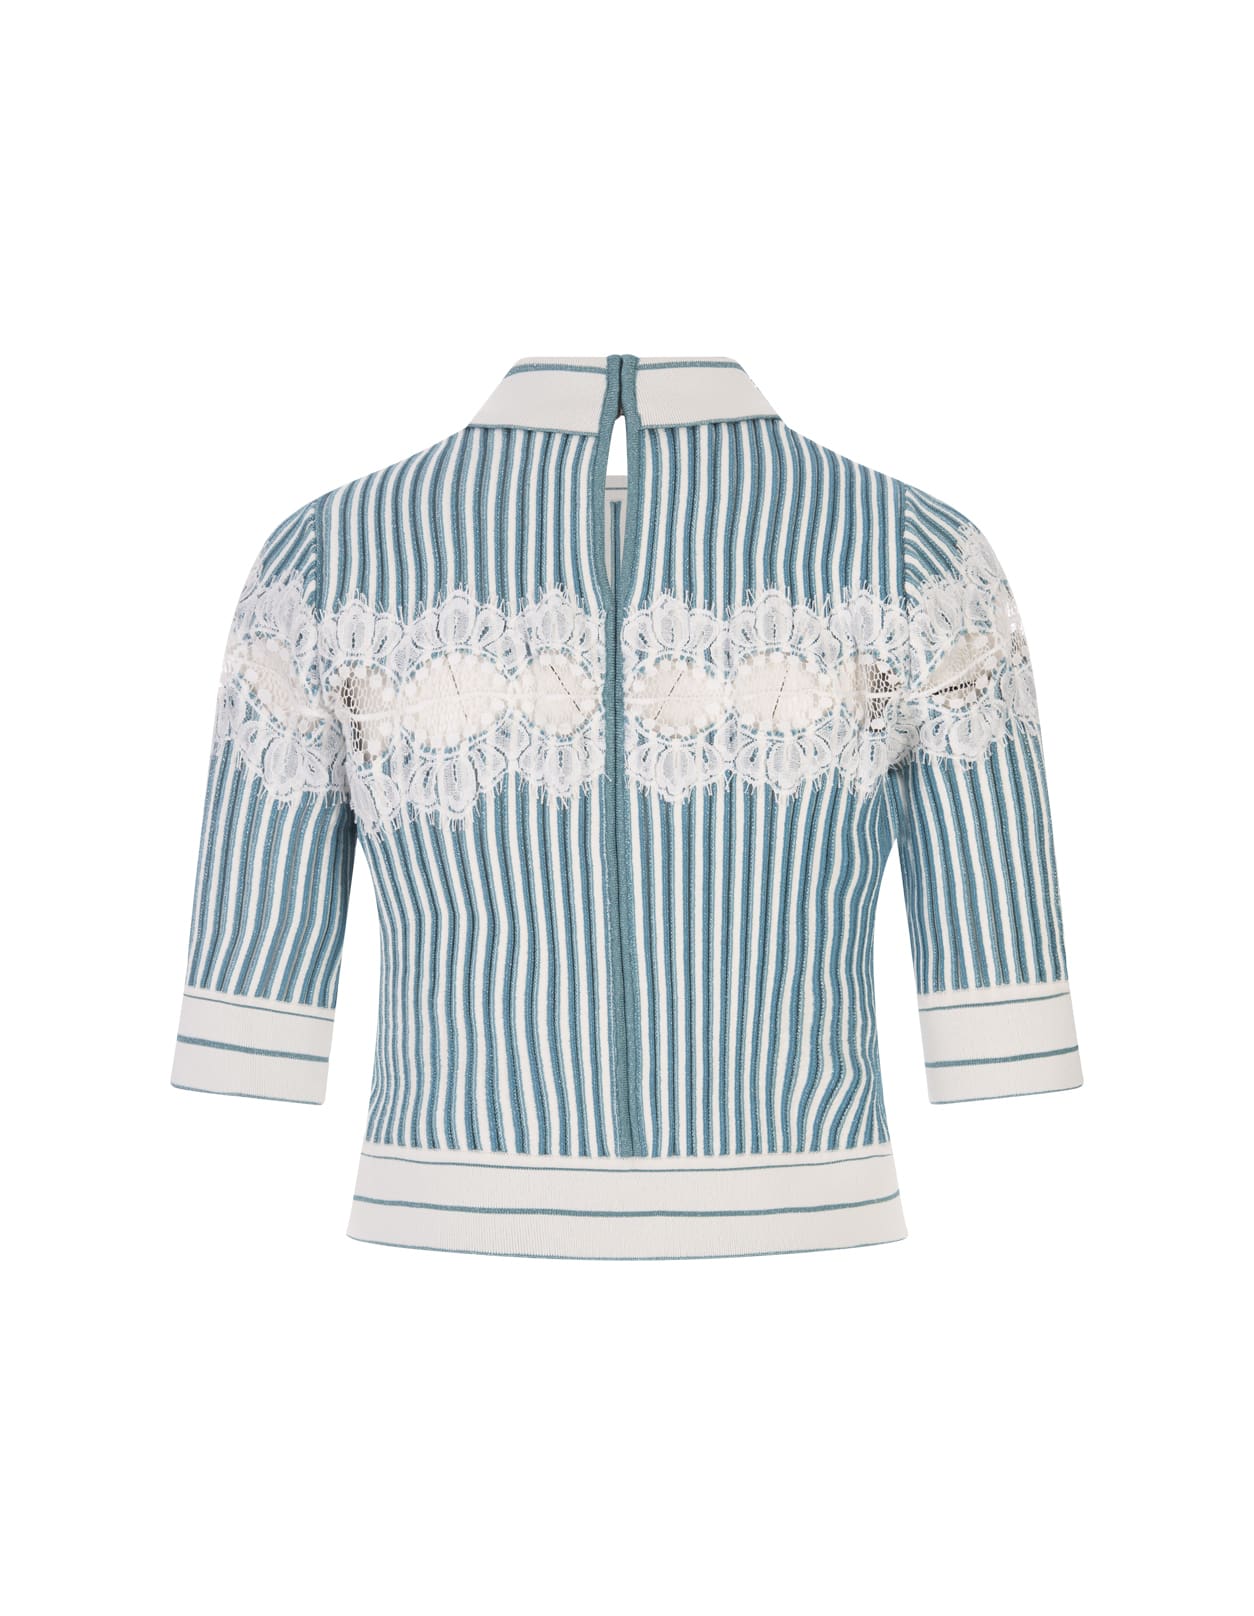 Shop Elie Saab Polo Shirt In White And Blue Gin Knit And Lace